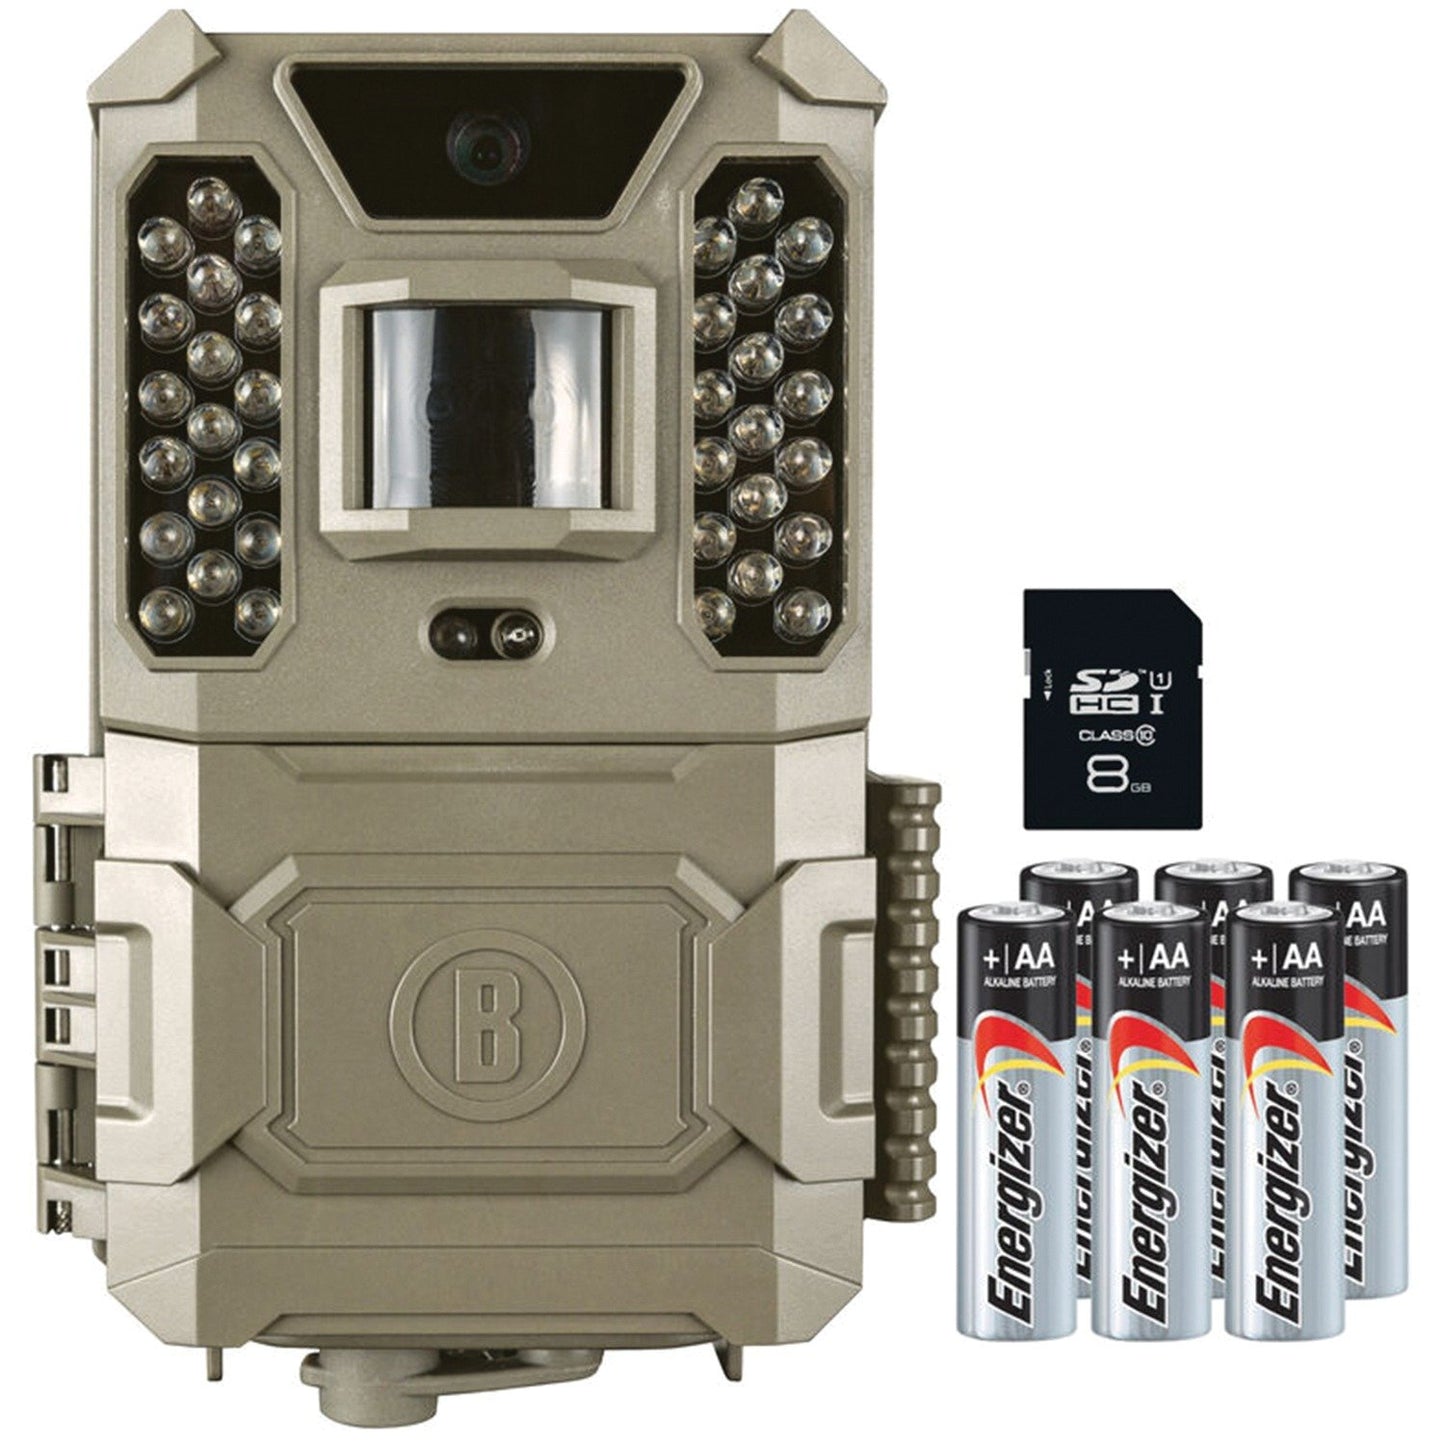 Bushnell 119932CB 24.0-Megapixel Core Prime Low Glow Trail Camera with Batteries